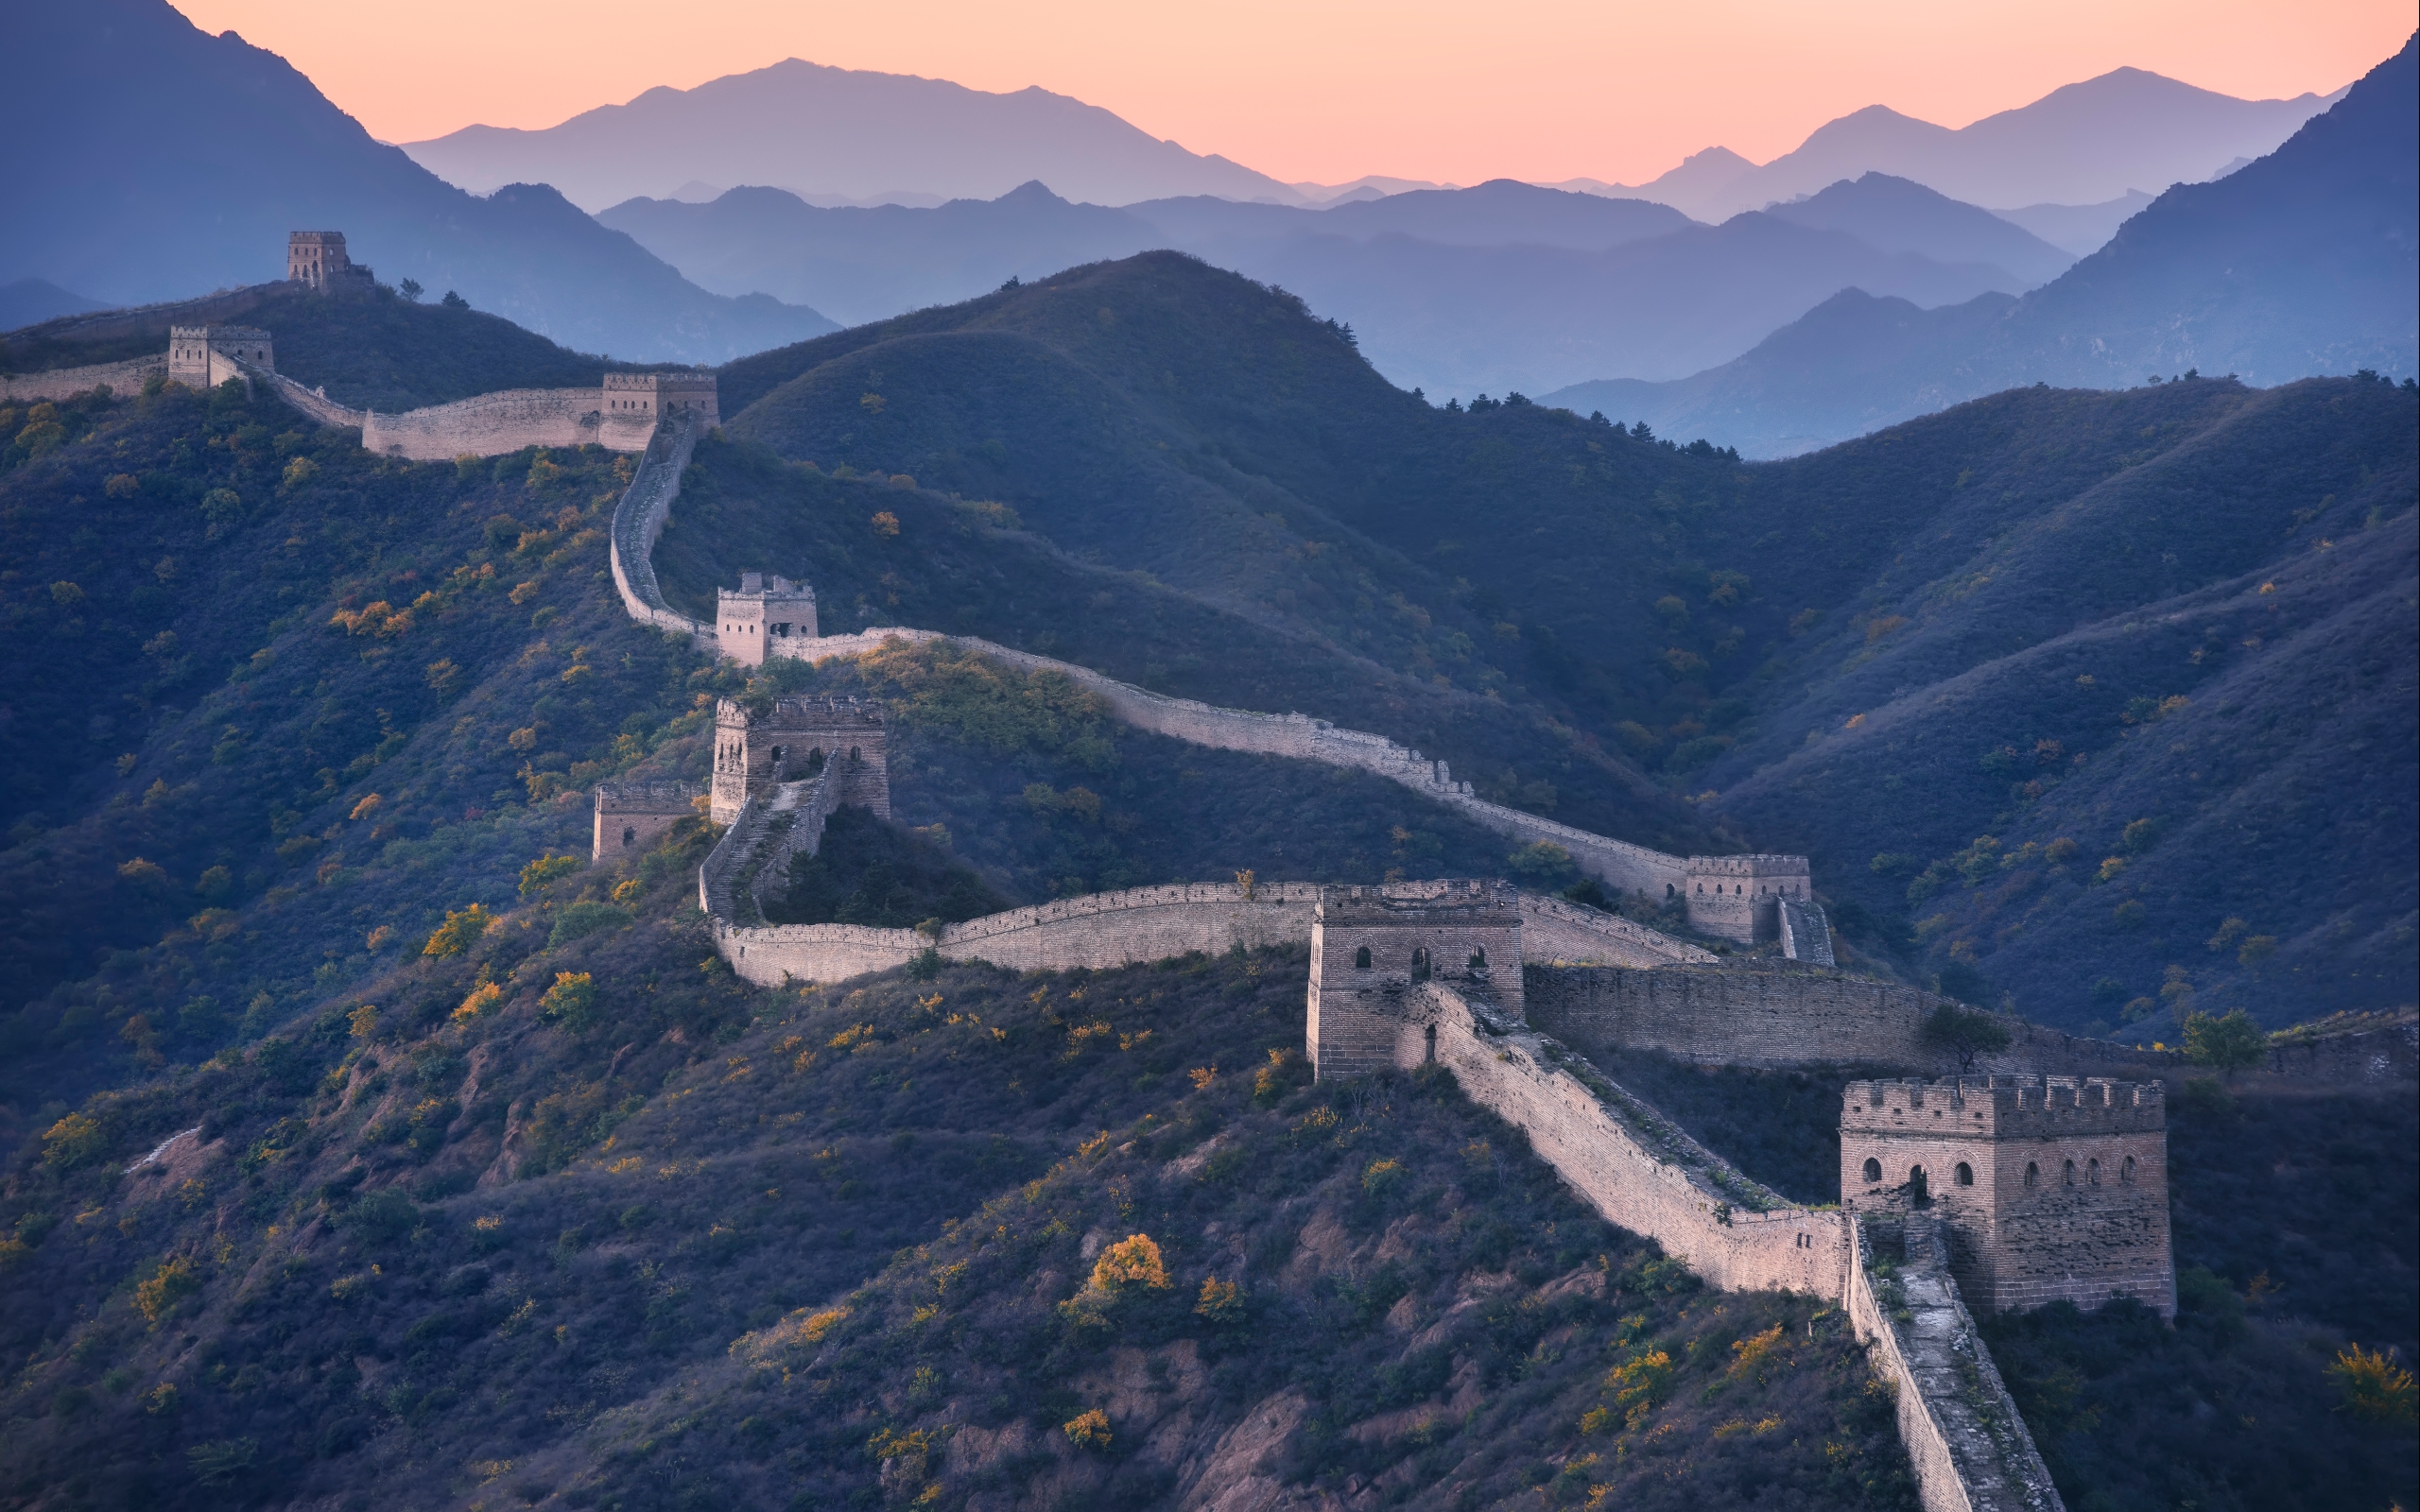 great wall of china, monuments, man made lock screen backgrounds